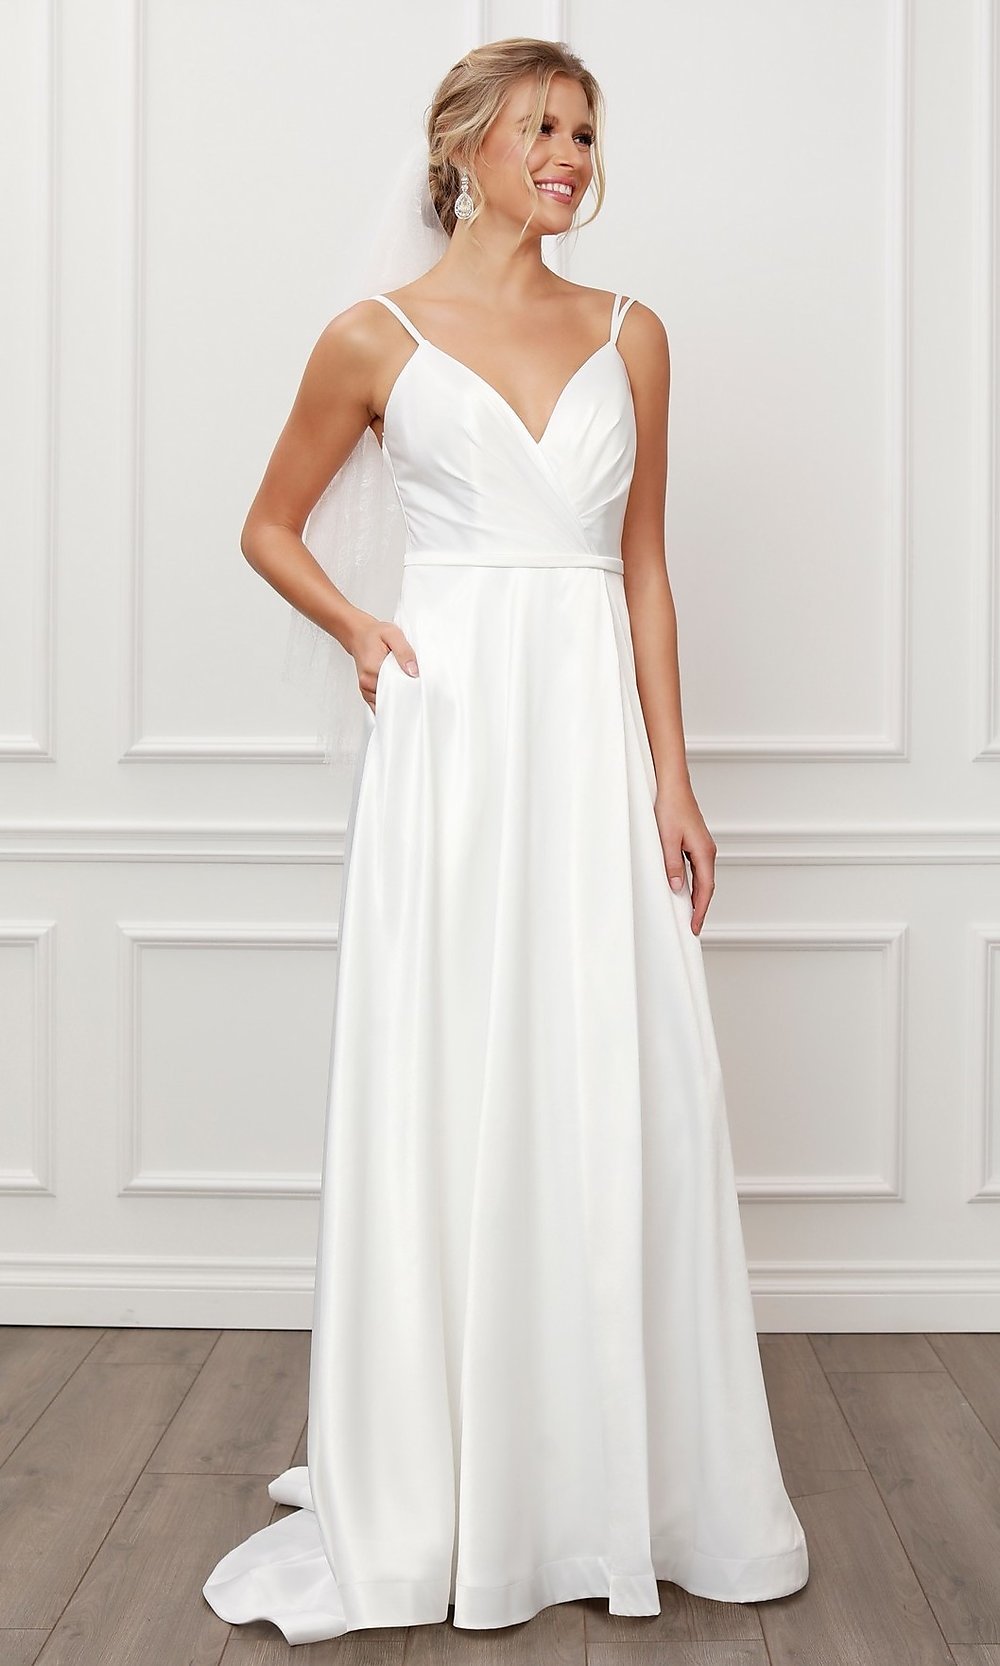  Long White Satin A-Line Formal Gown with Pockets